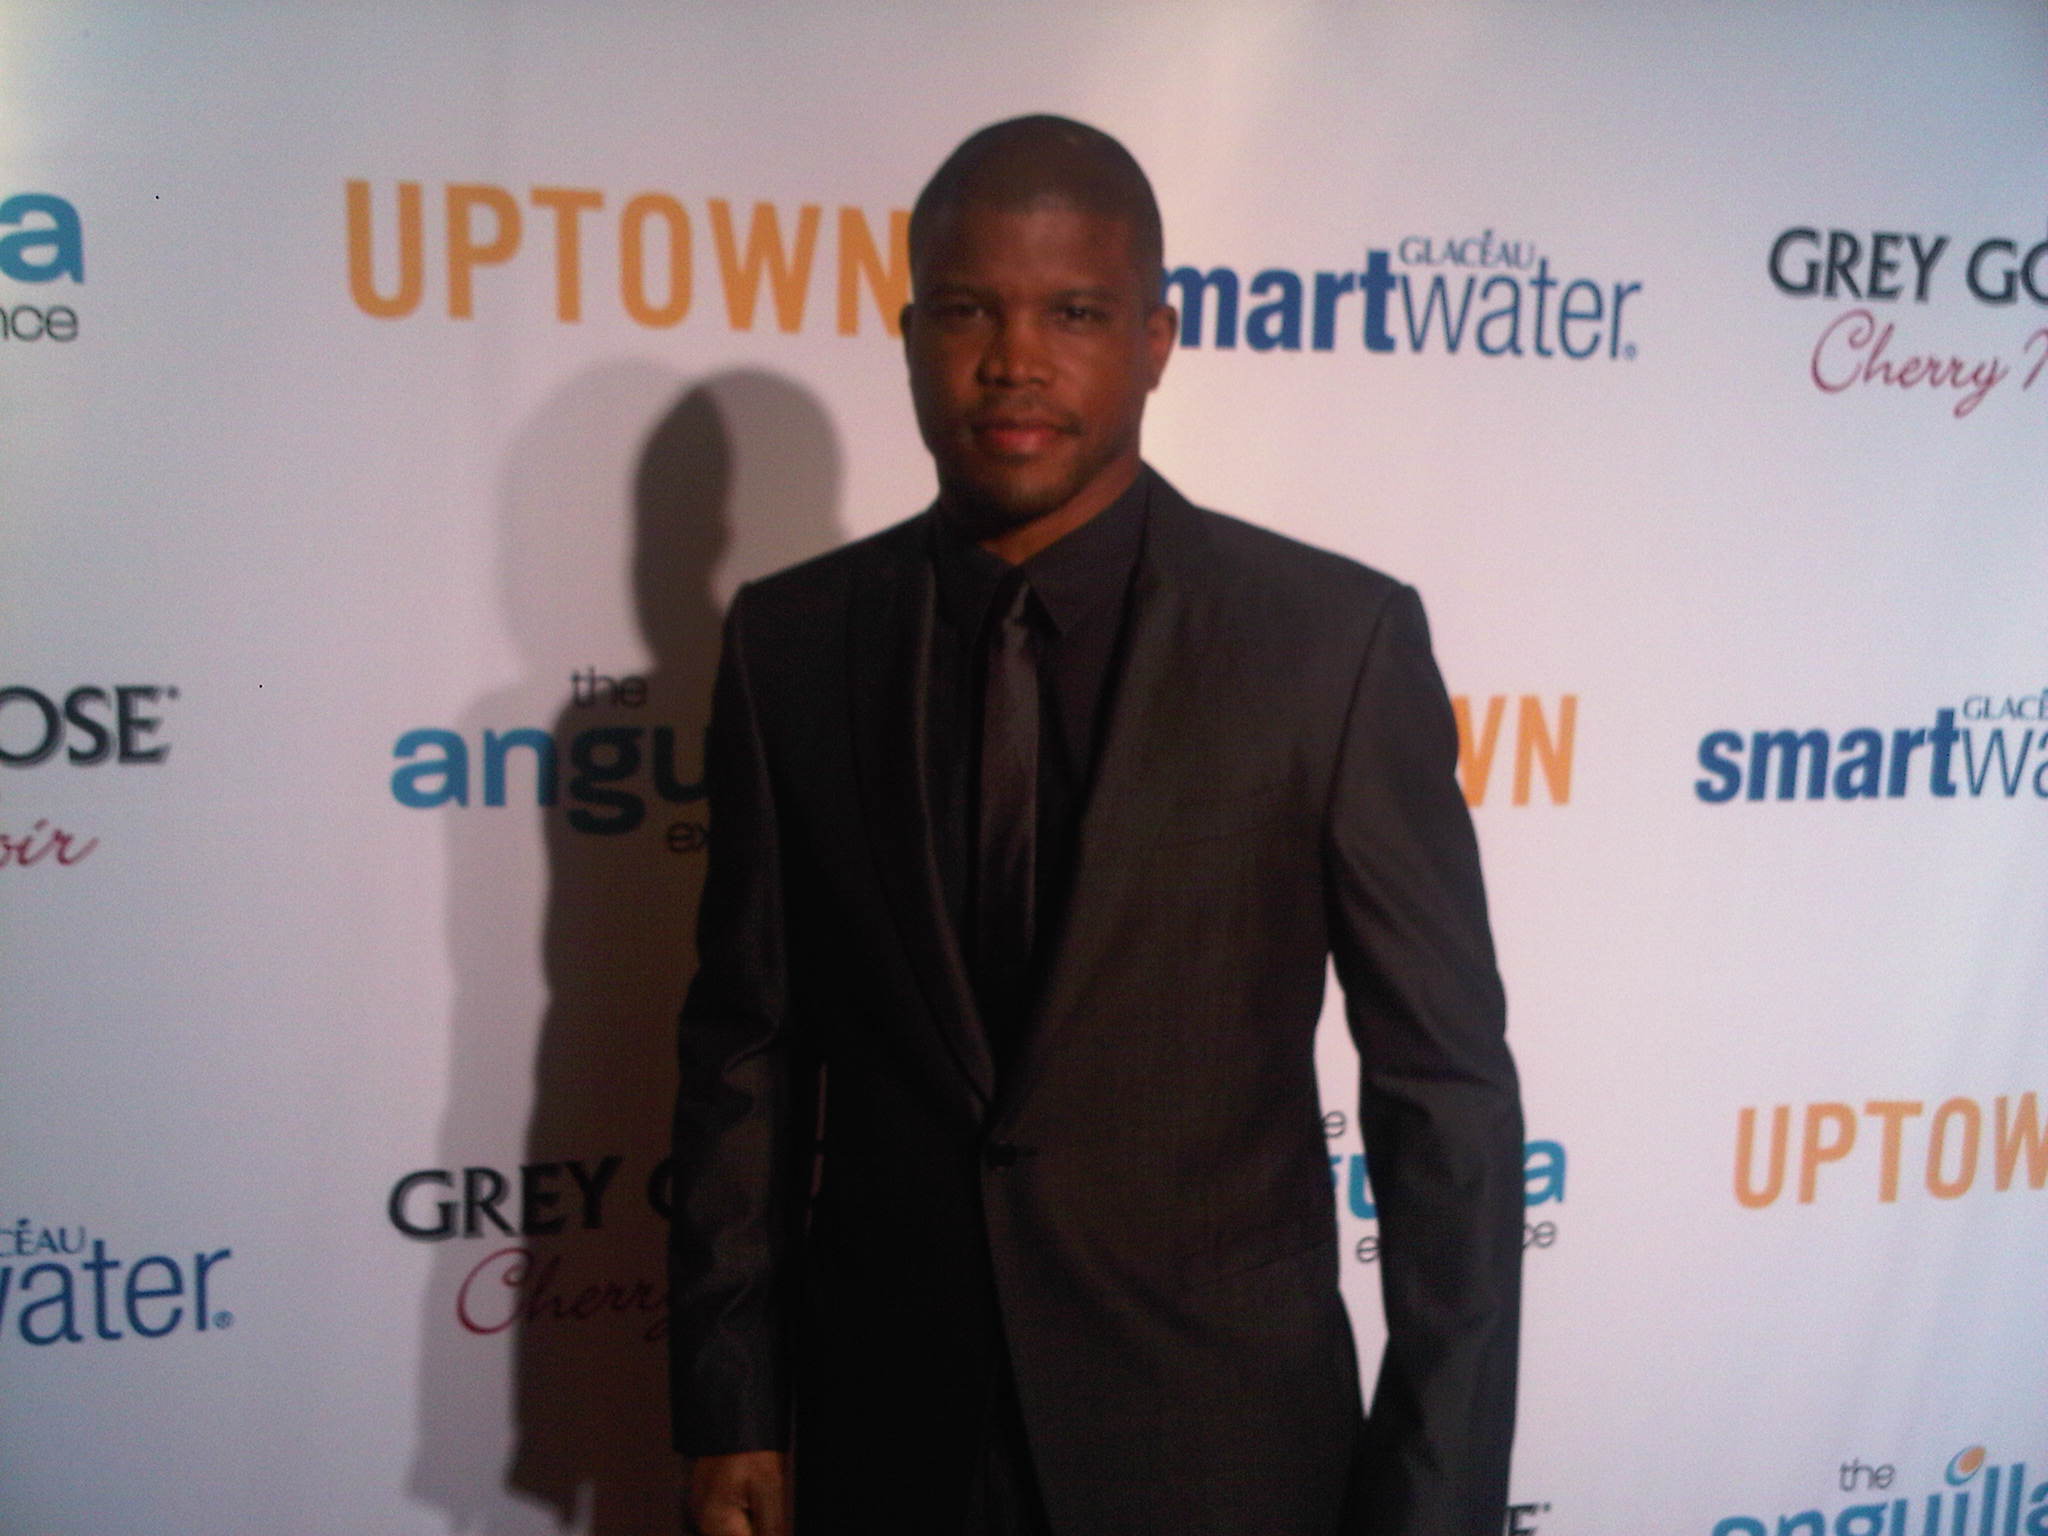 Sharif Atkins at the UPTOWN Magazine Pre-Oscar Party 2012